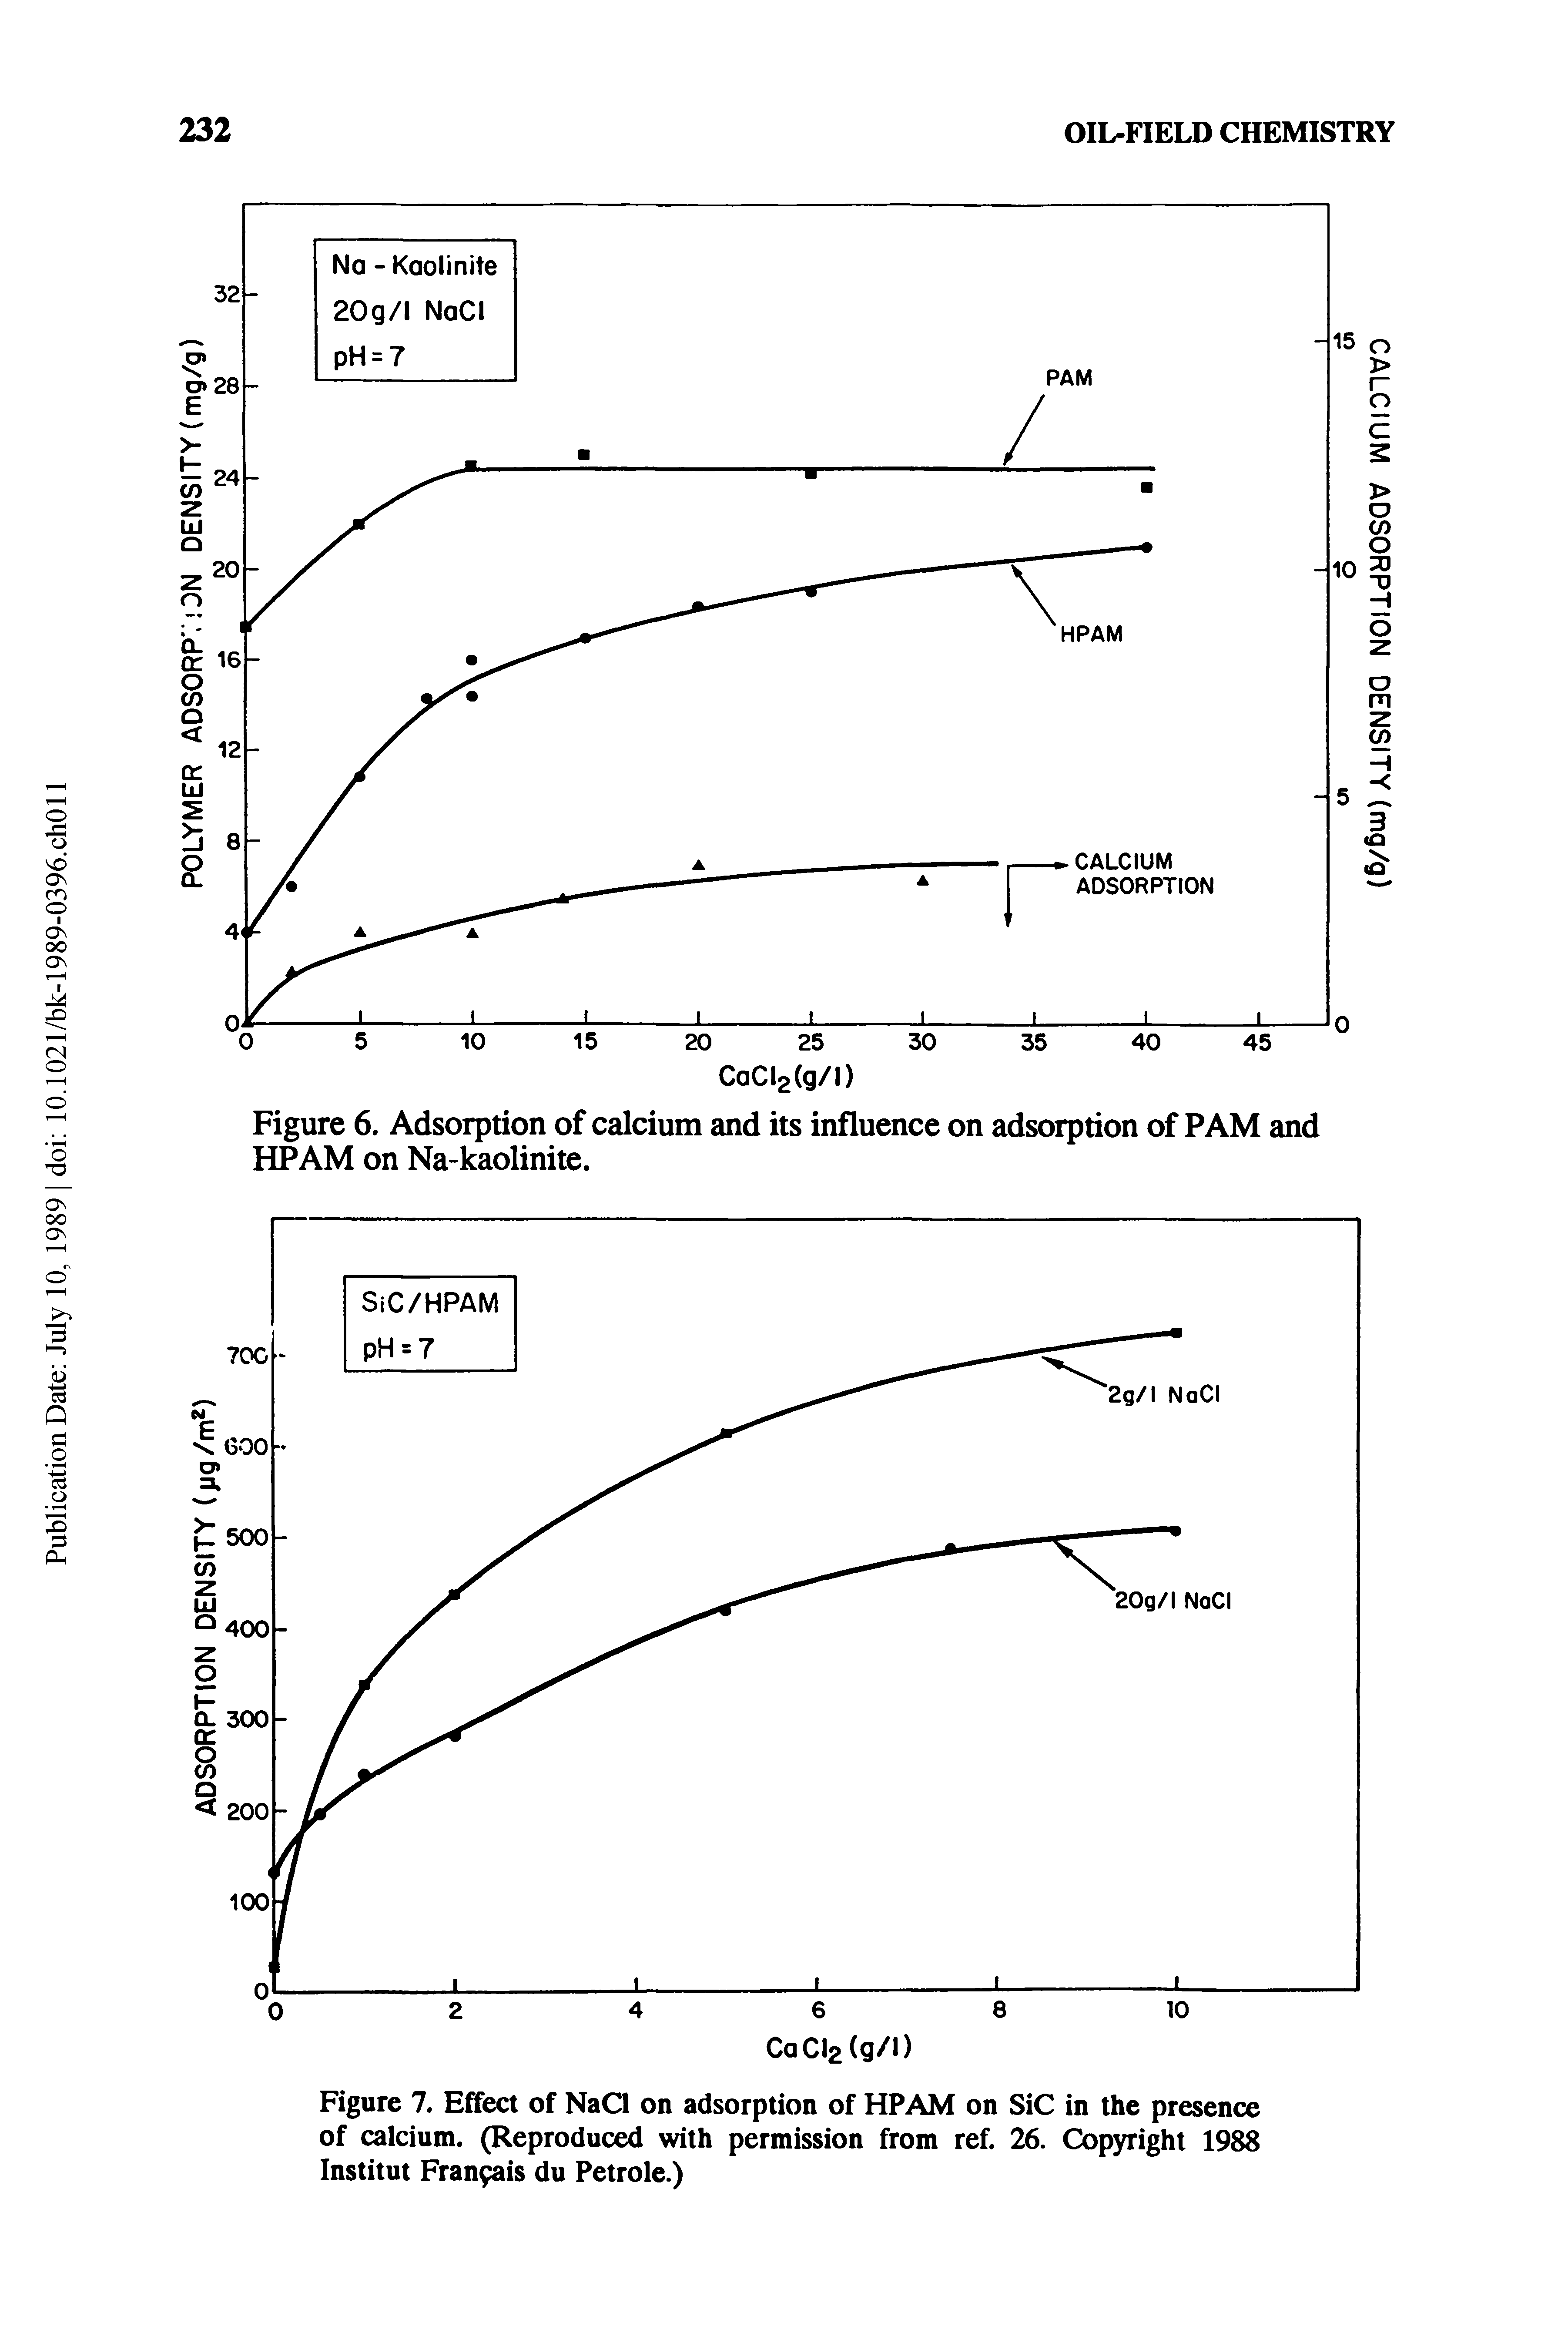 Figure 7. Effect of NaCl on adsorption of HP AM on SiC in the presence of calcium. (Reproduced with permission from ref. 26. Copyright 1988 Institut Francis du Petrole.)...